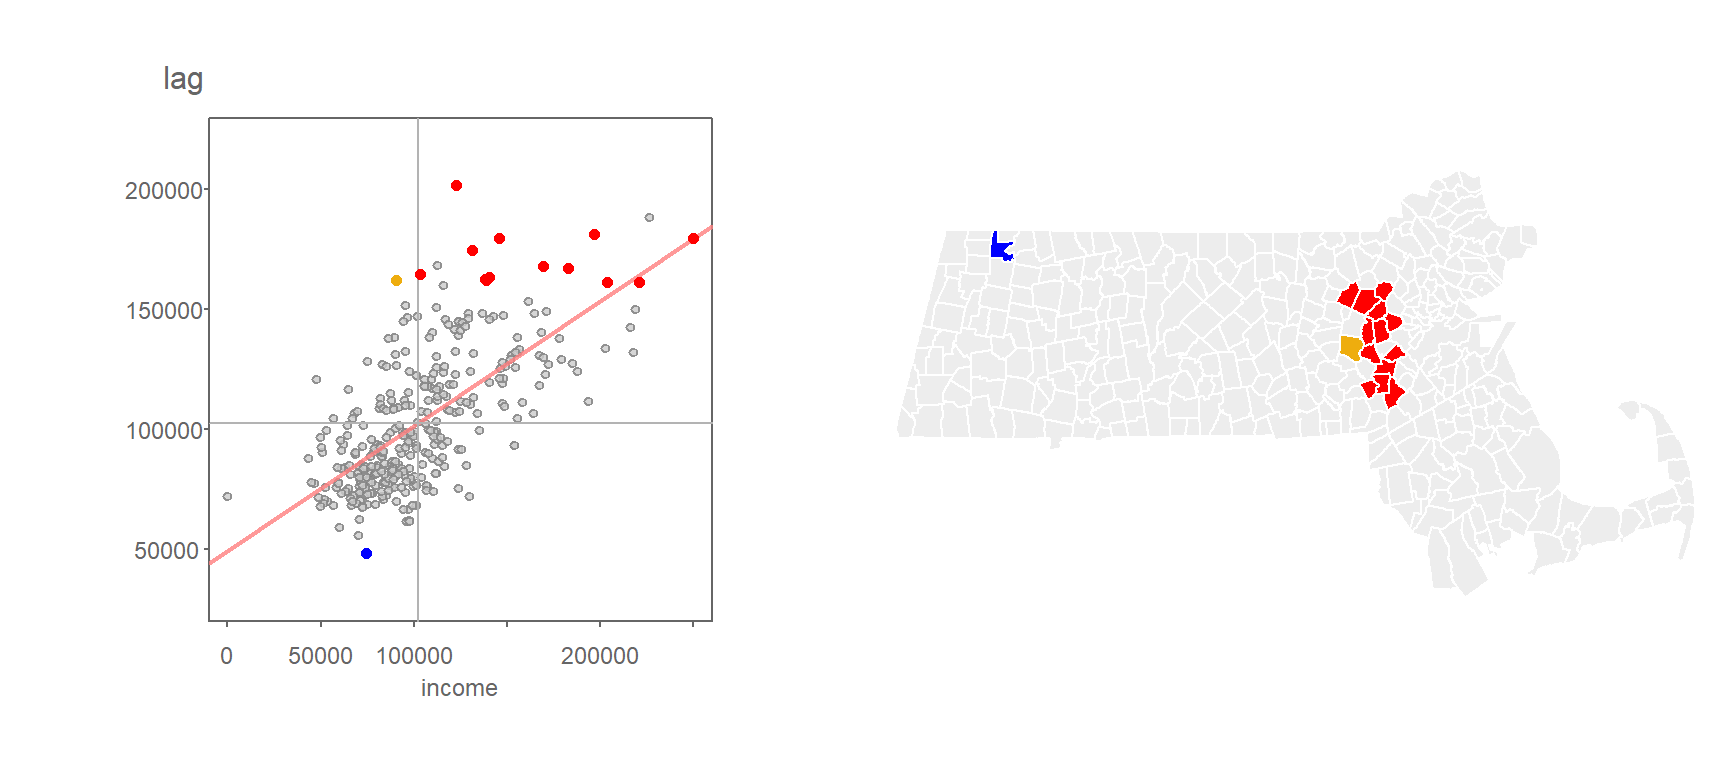 Clusters deemed significant at the p=0.01 level when applying the FDR correction.